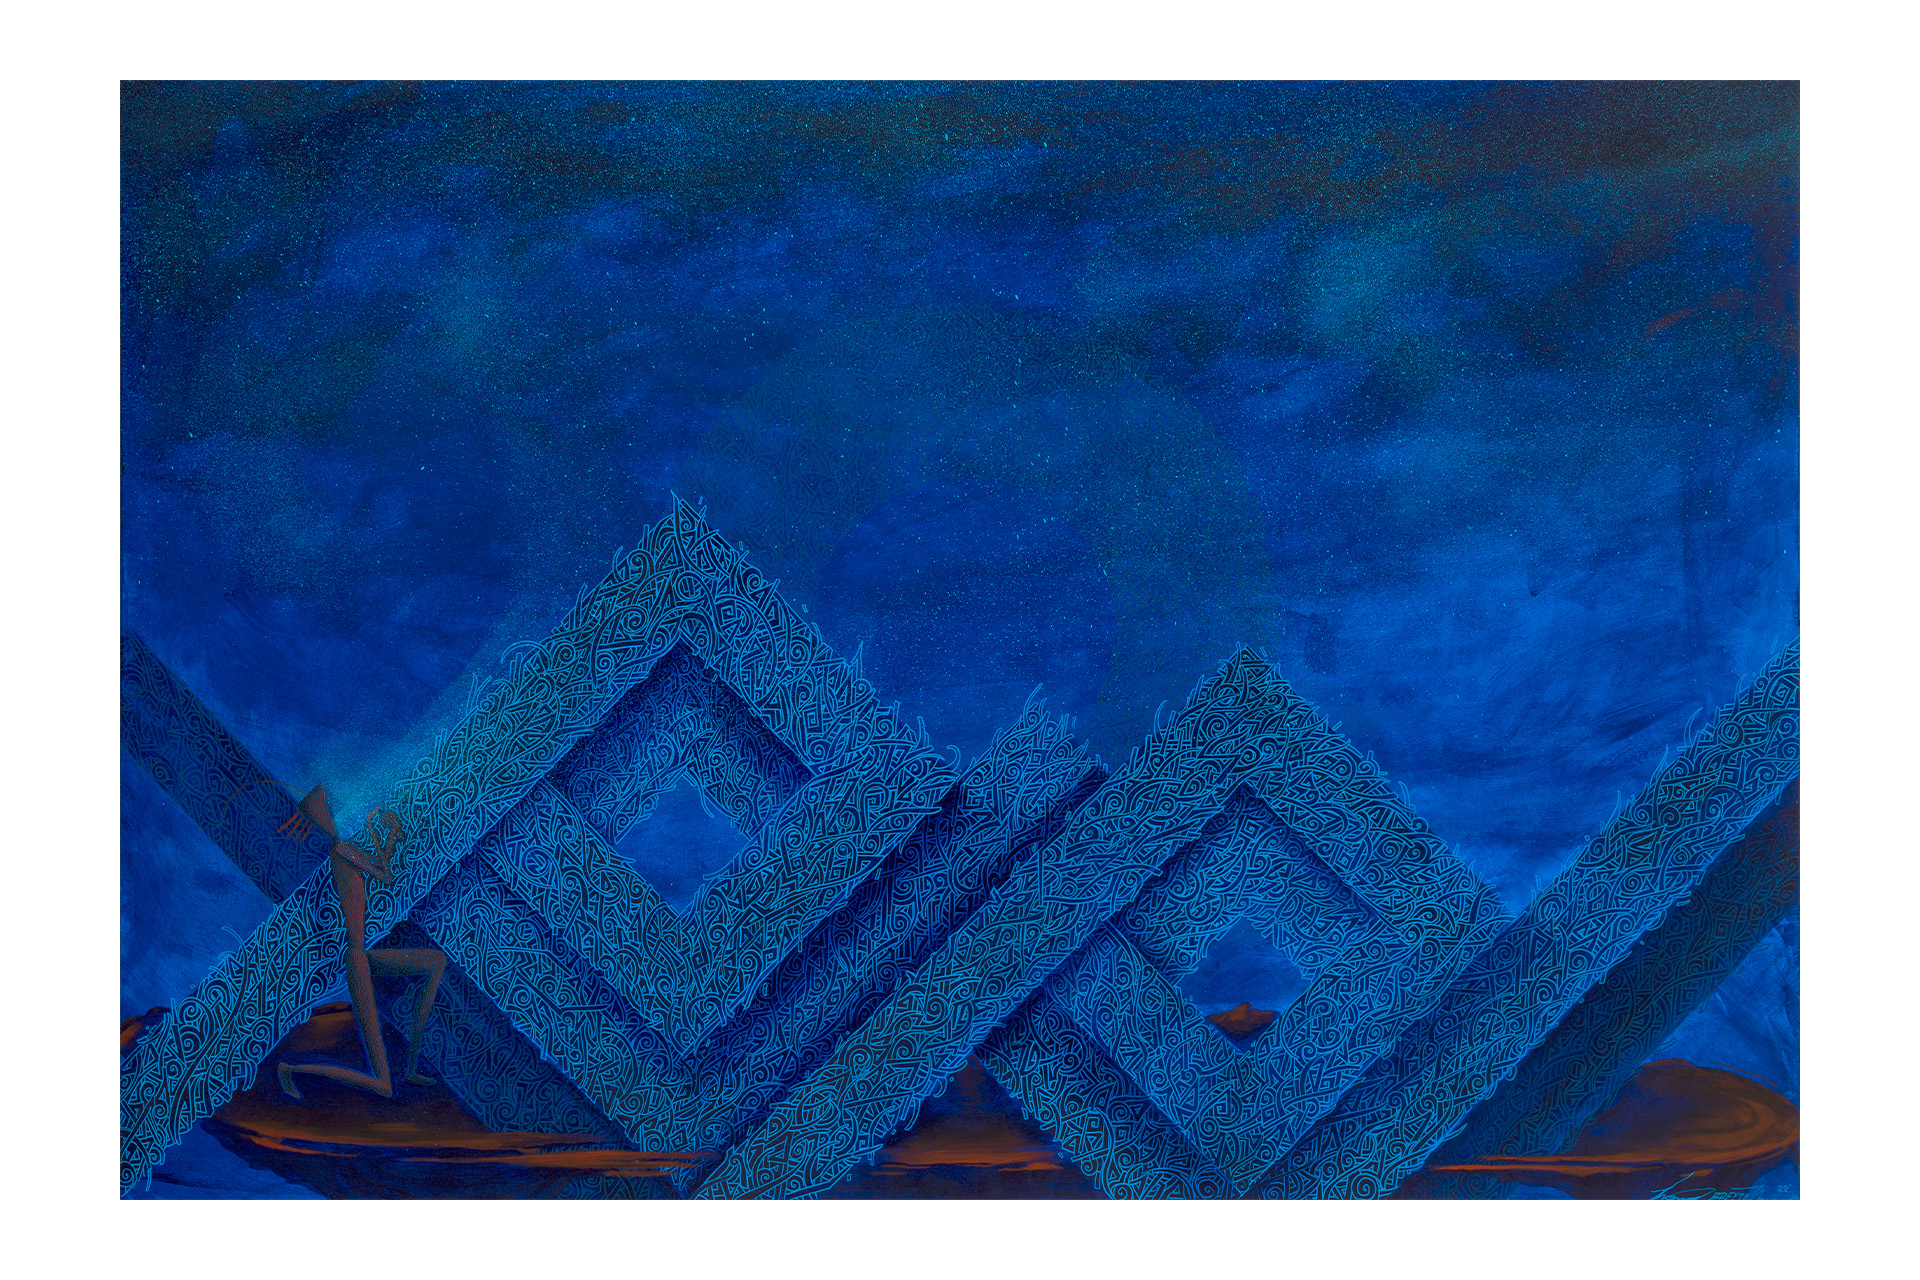 A painting of blue geometric shapes on a blue background.